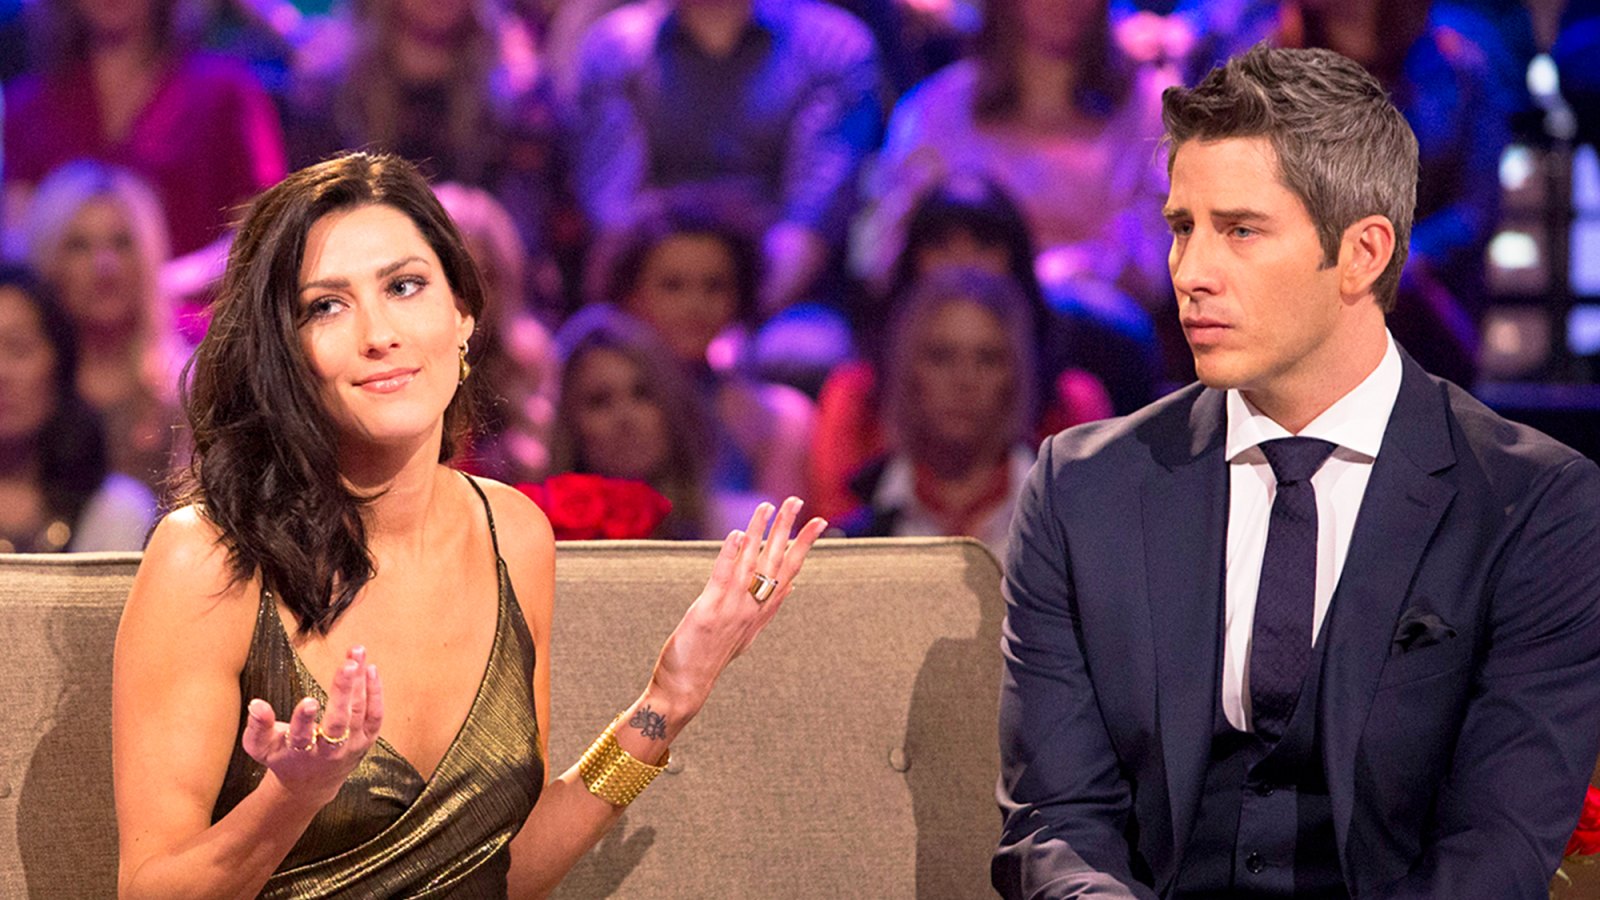 Arie Luyendyk Jr. and Becca Kufrin on ‘The Bachelor: After the Final Rose‘